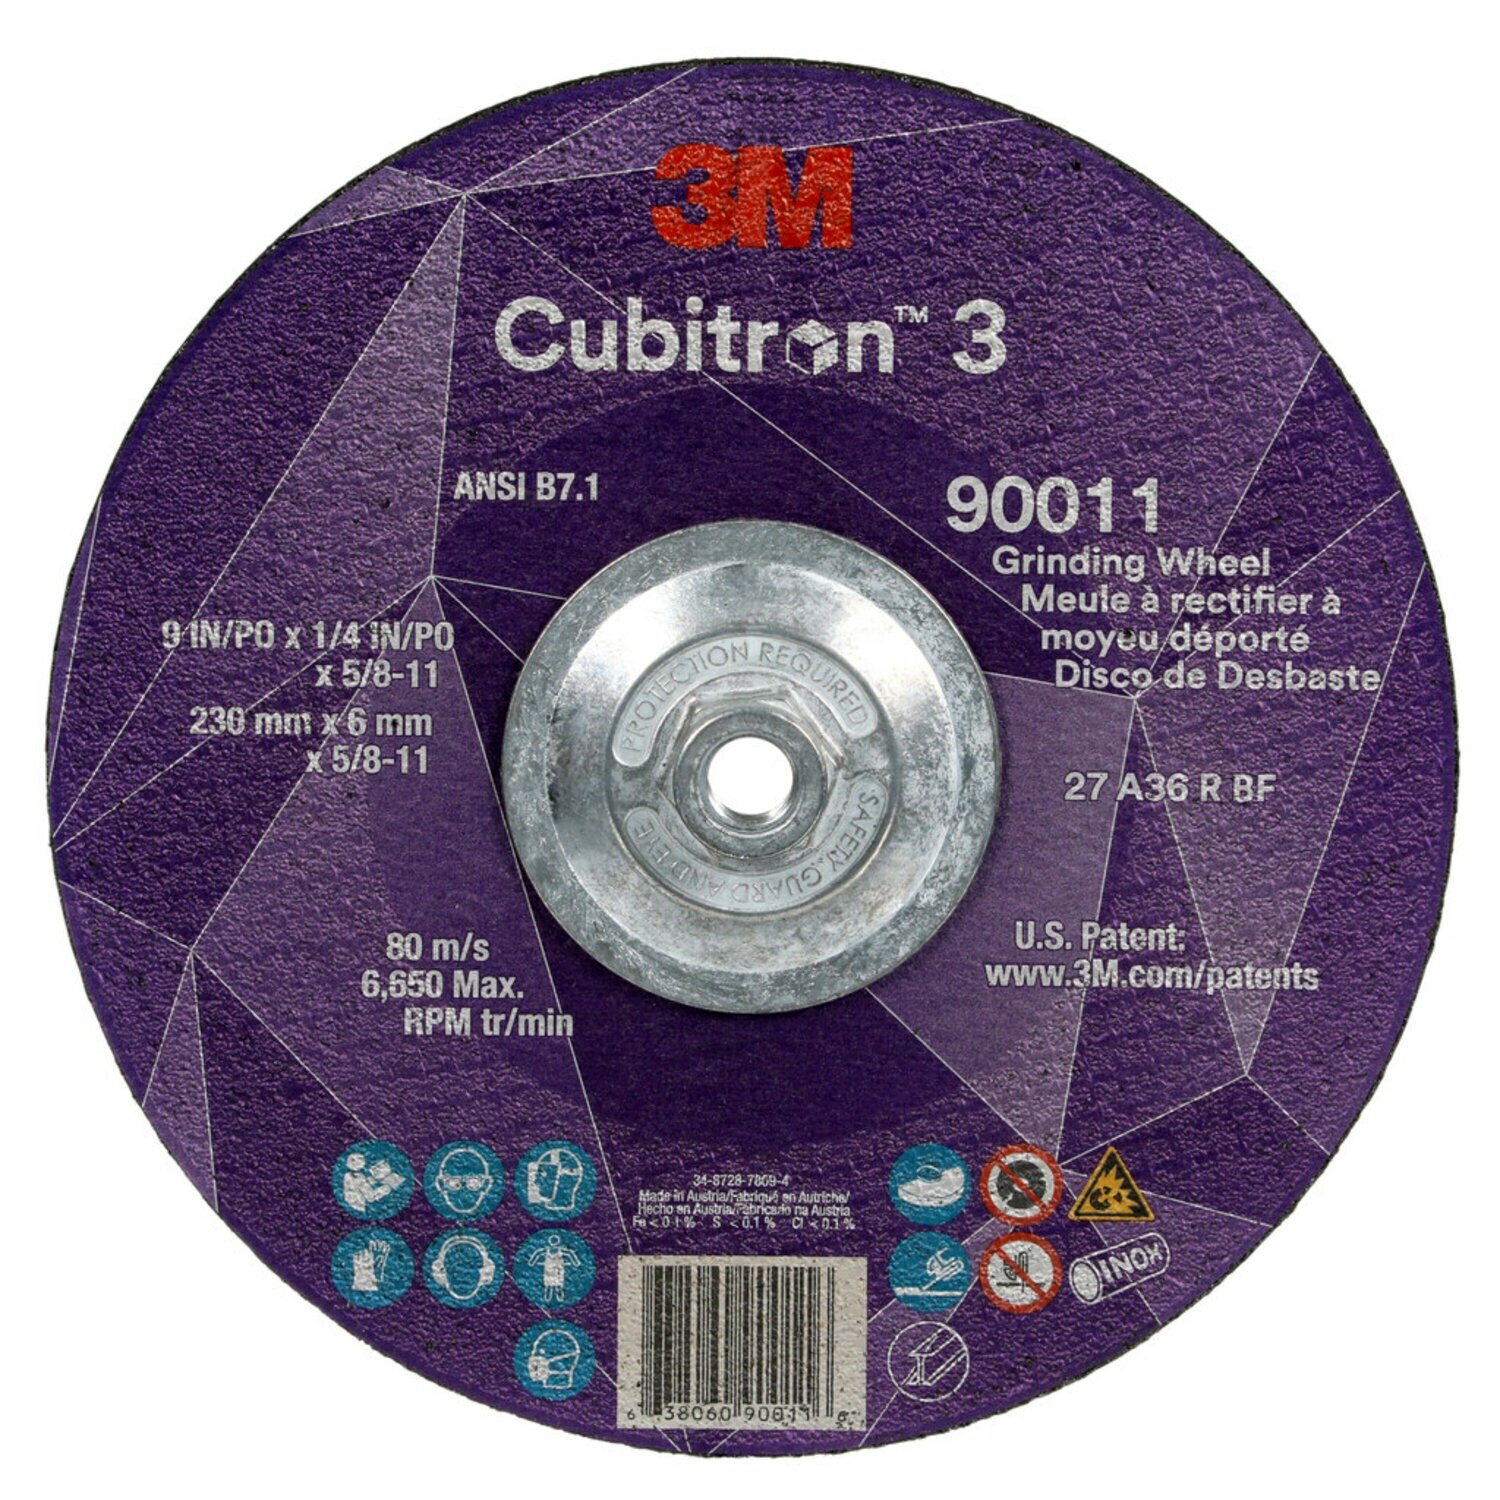 7100312964 - 3M Cubitron 3 Depressed Center Grinding Wheel, 90011, 36+, T27, 9 in x
1/4 in x 5/8 in-11 (230x6mmx5/8-11in), ANSI, 10 ea/Case